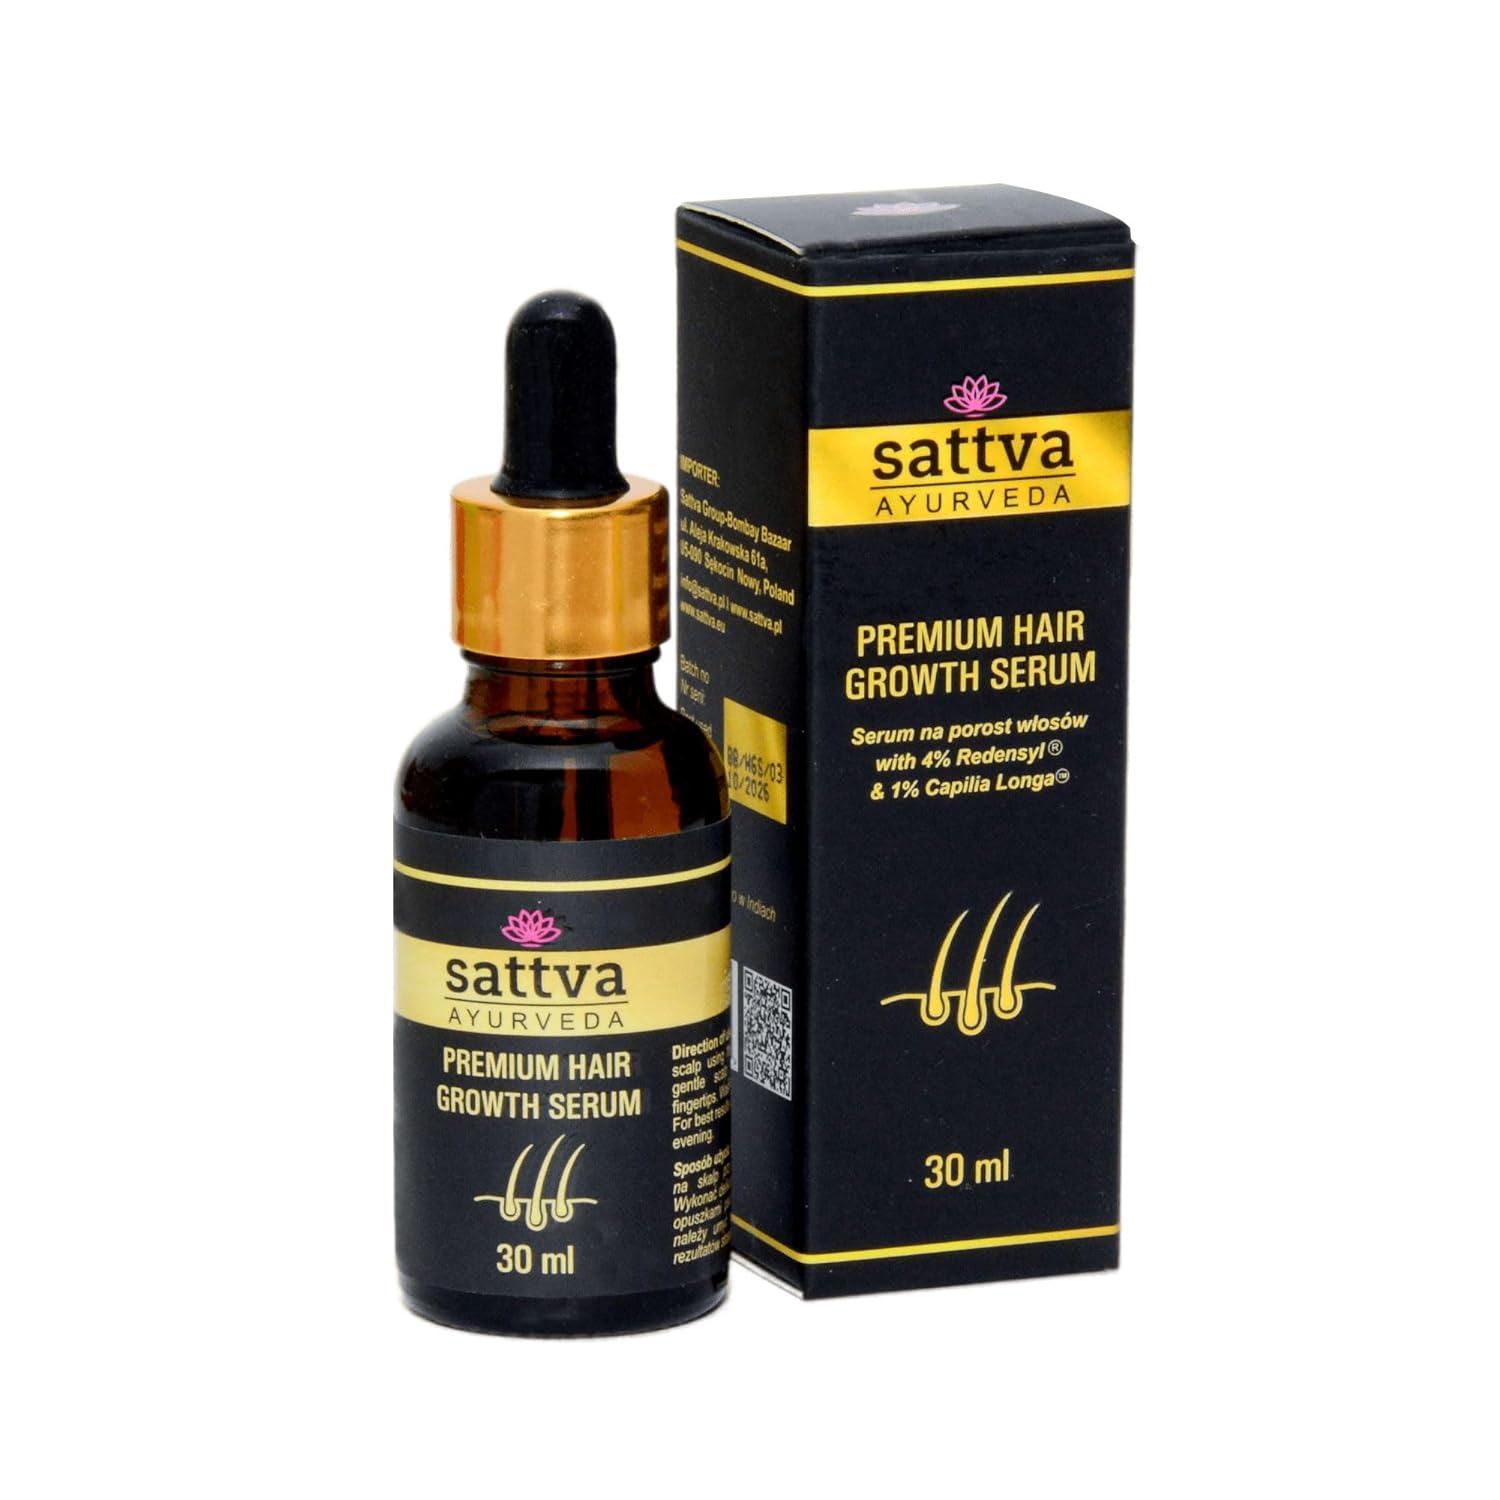 Sattva Ayurveda Hair Growth Serum with Rosemary Extract and Redensyl® for Effective Treatment of Hair Loss in Women and Men